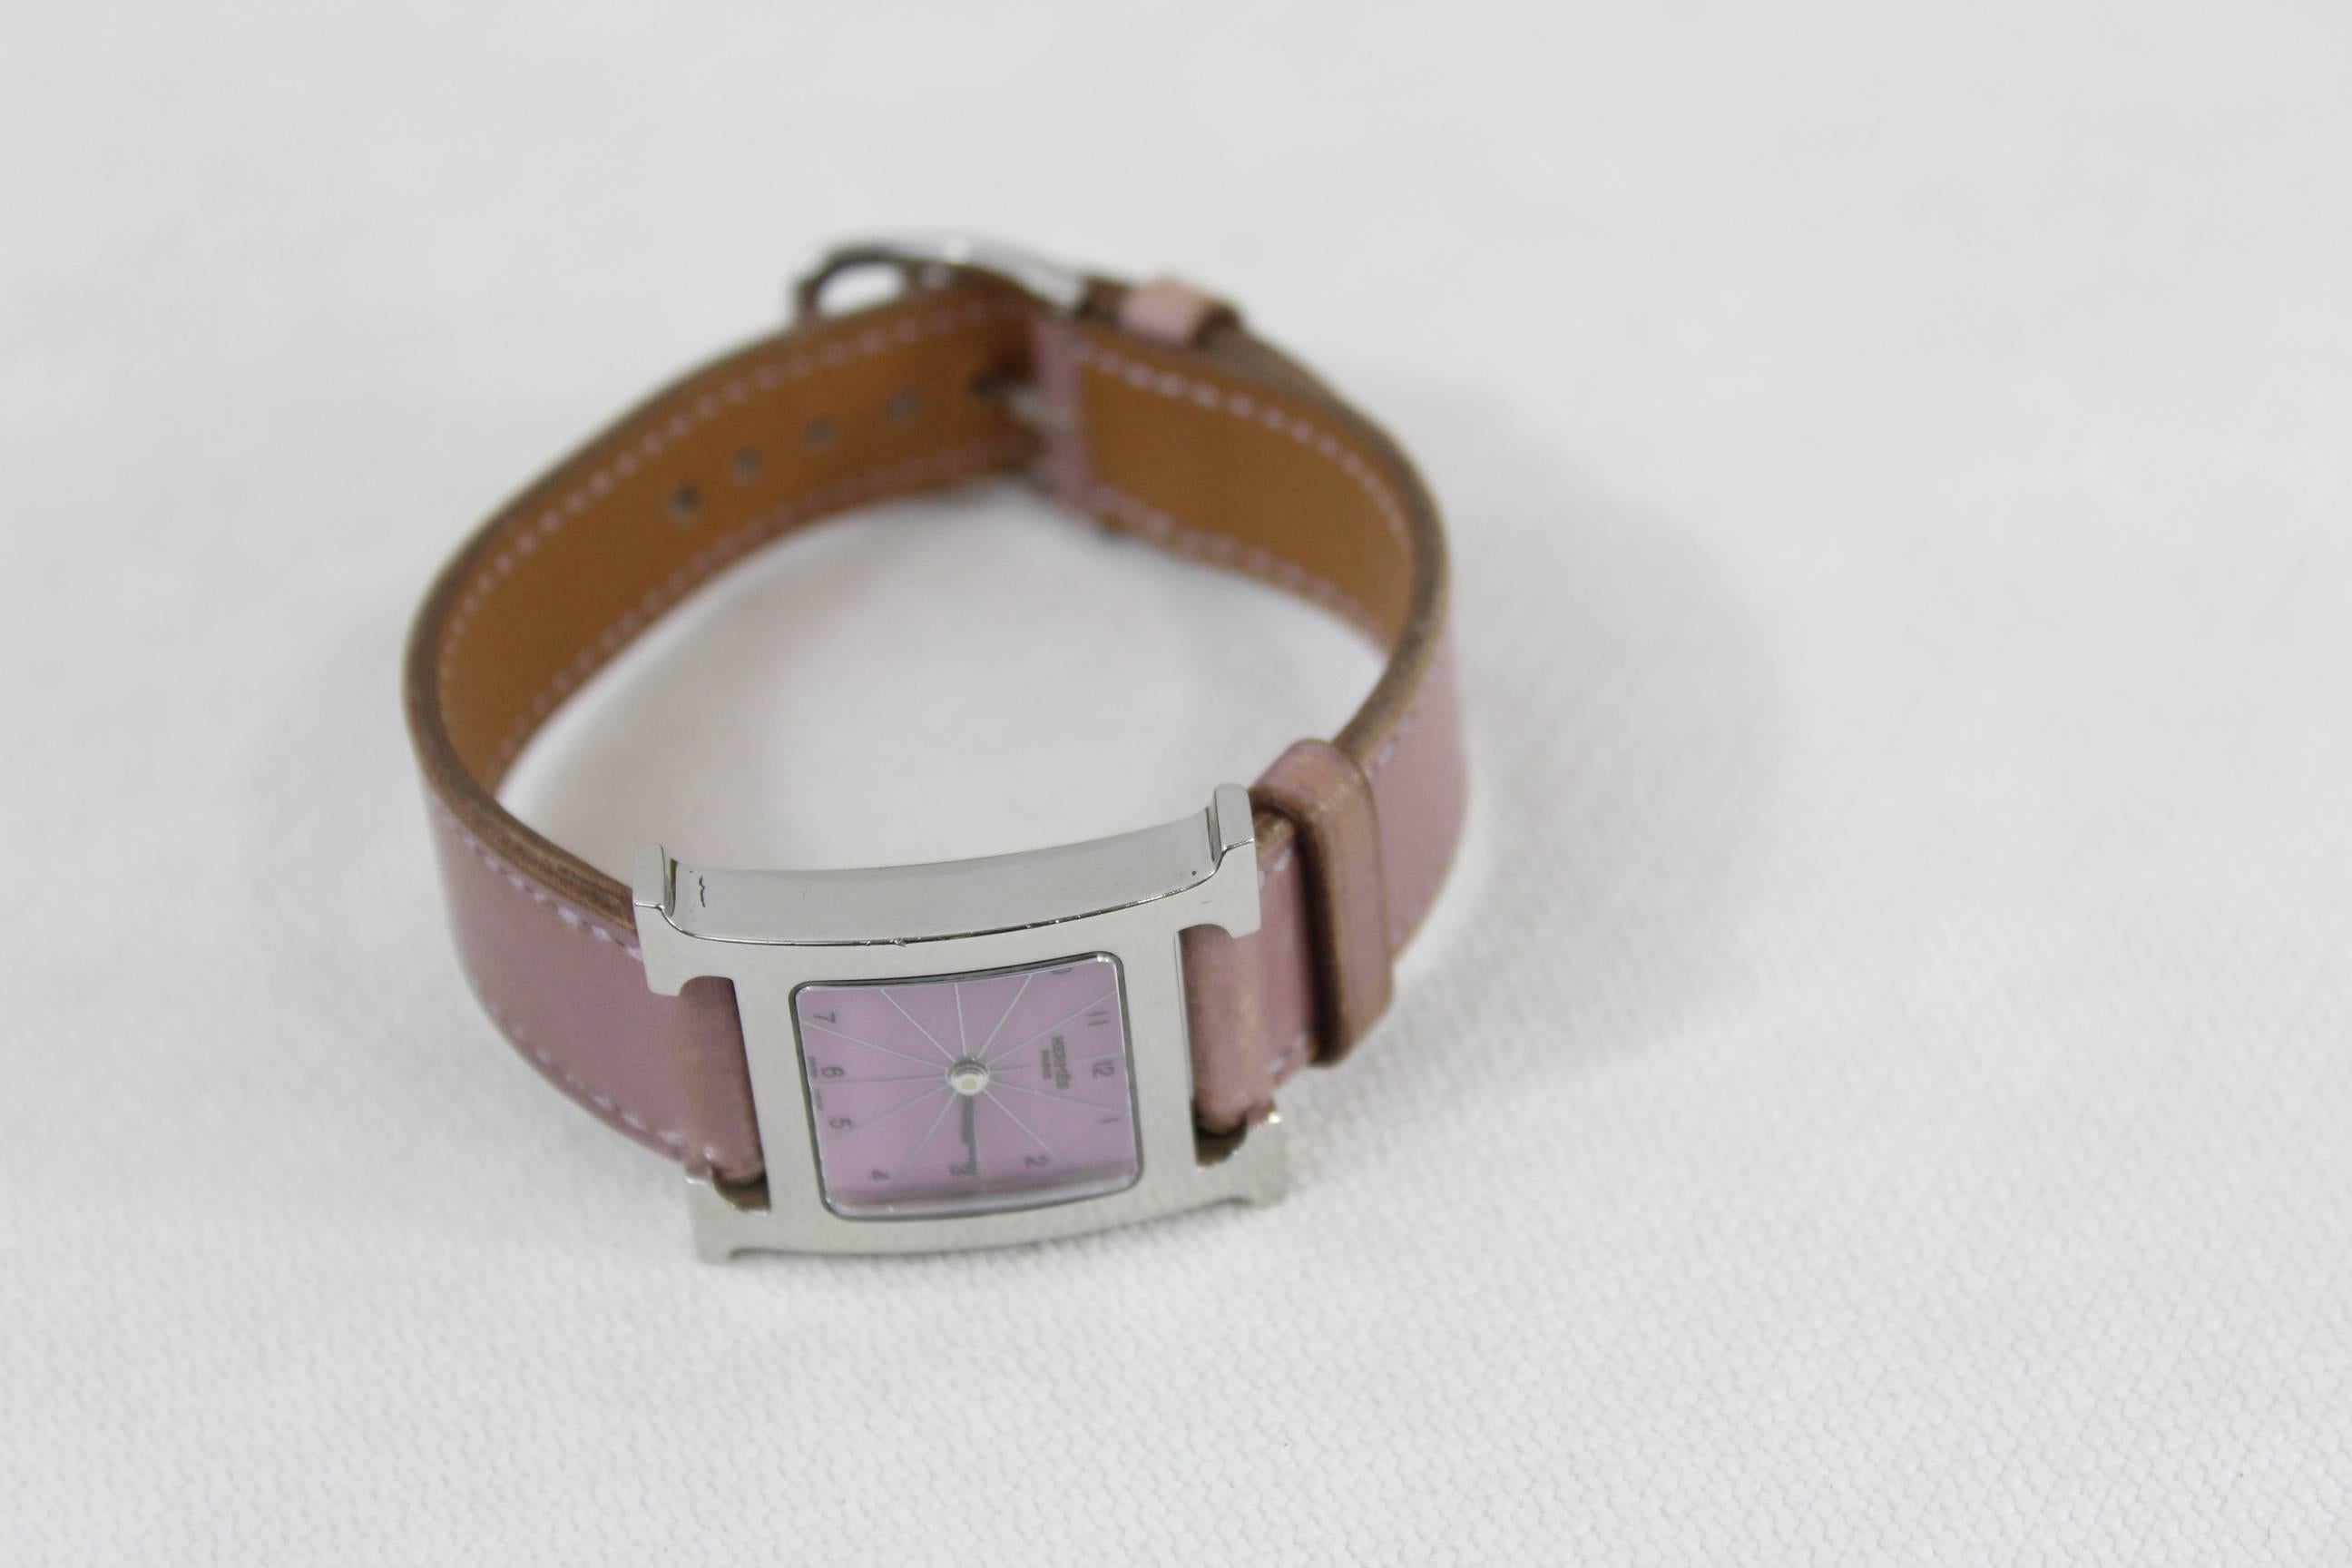 Really nice Hermès Limited eidtion pink watch.
Pink bracelet and dial.
Stainless steel case
Band signes F in a square (2002)
Good working condition
Some patina in the band
Minor scratches from use in the case but nothing important